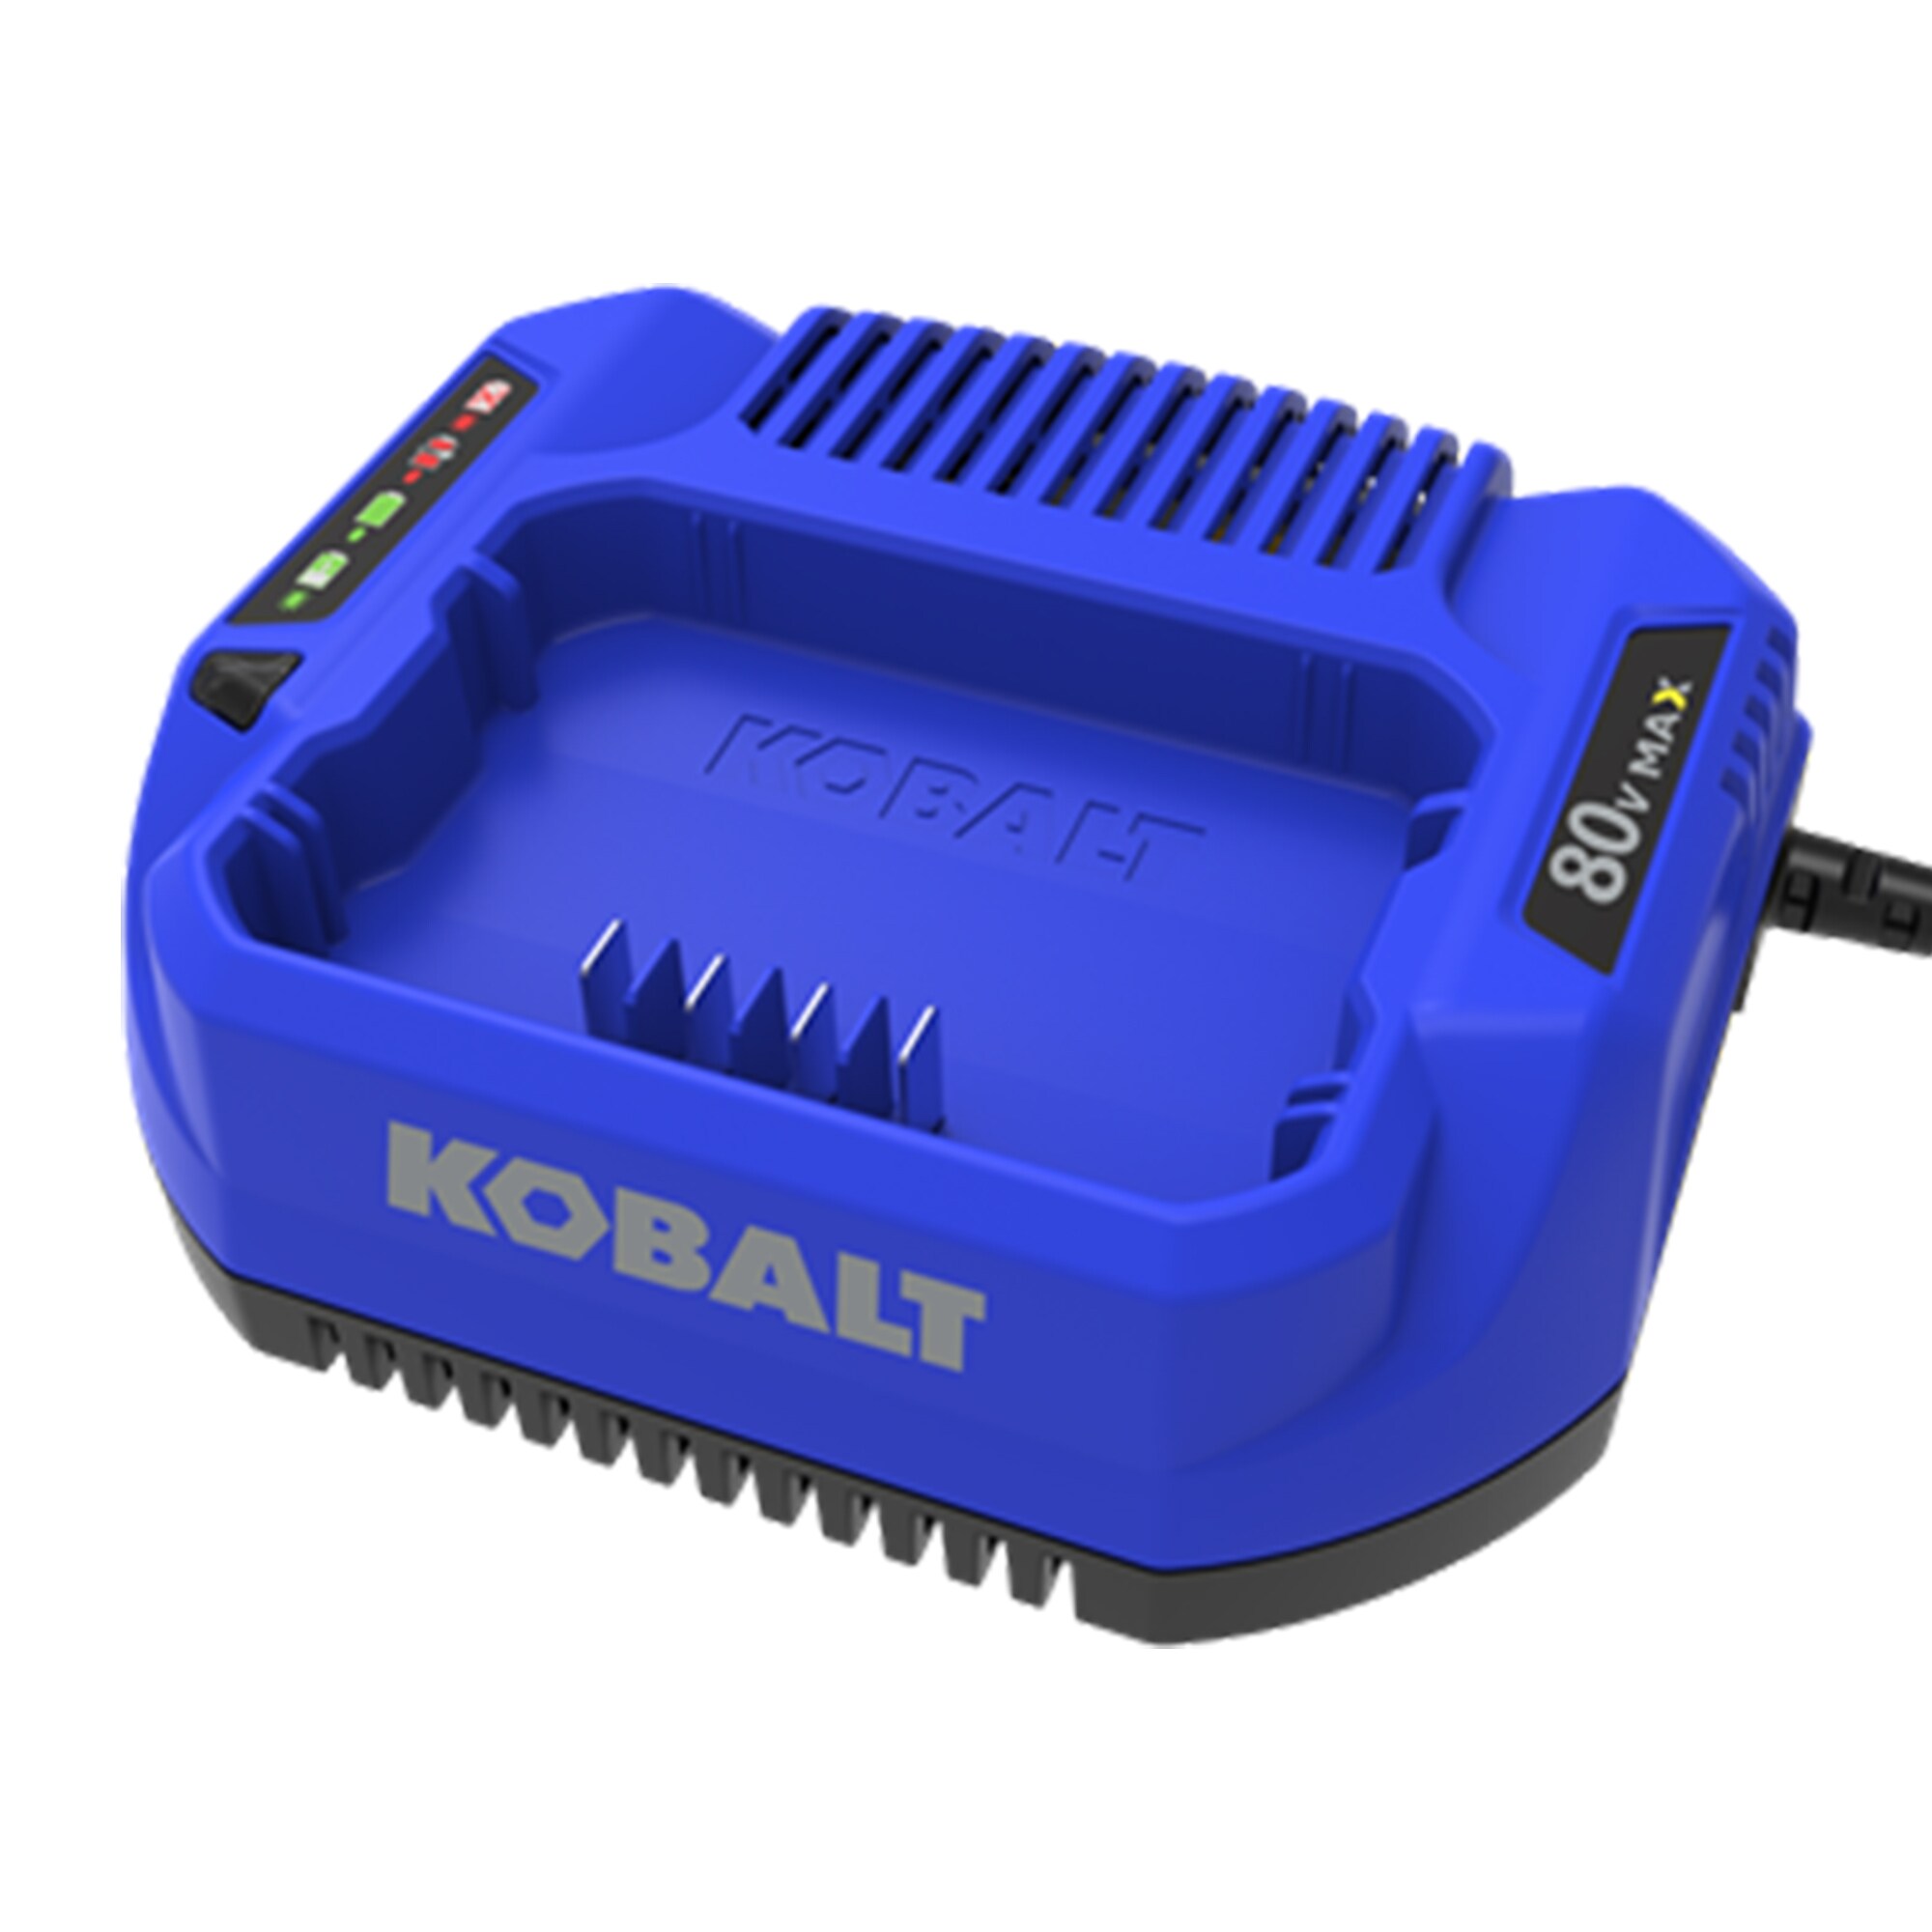 Kobalt 80 Volt Lithium Ion Li Ion Charger In The Cordless Power